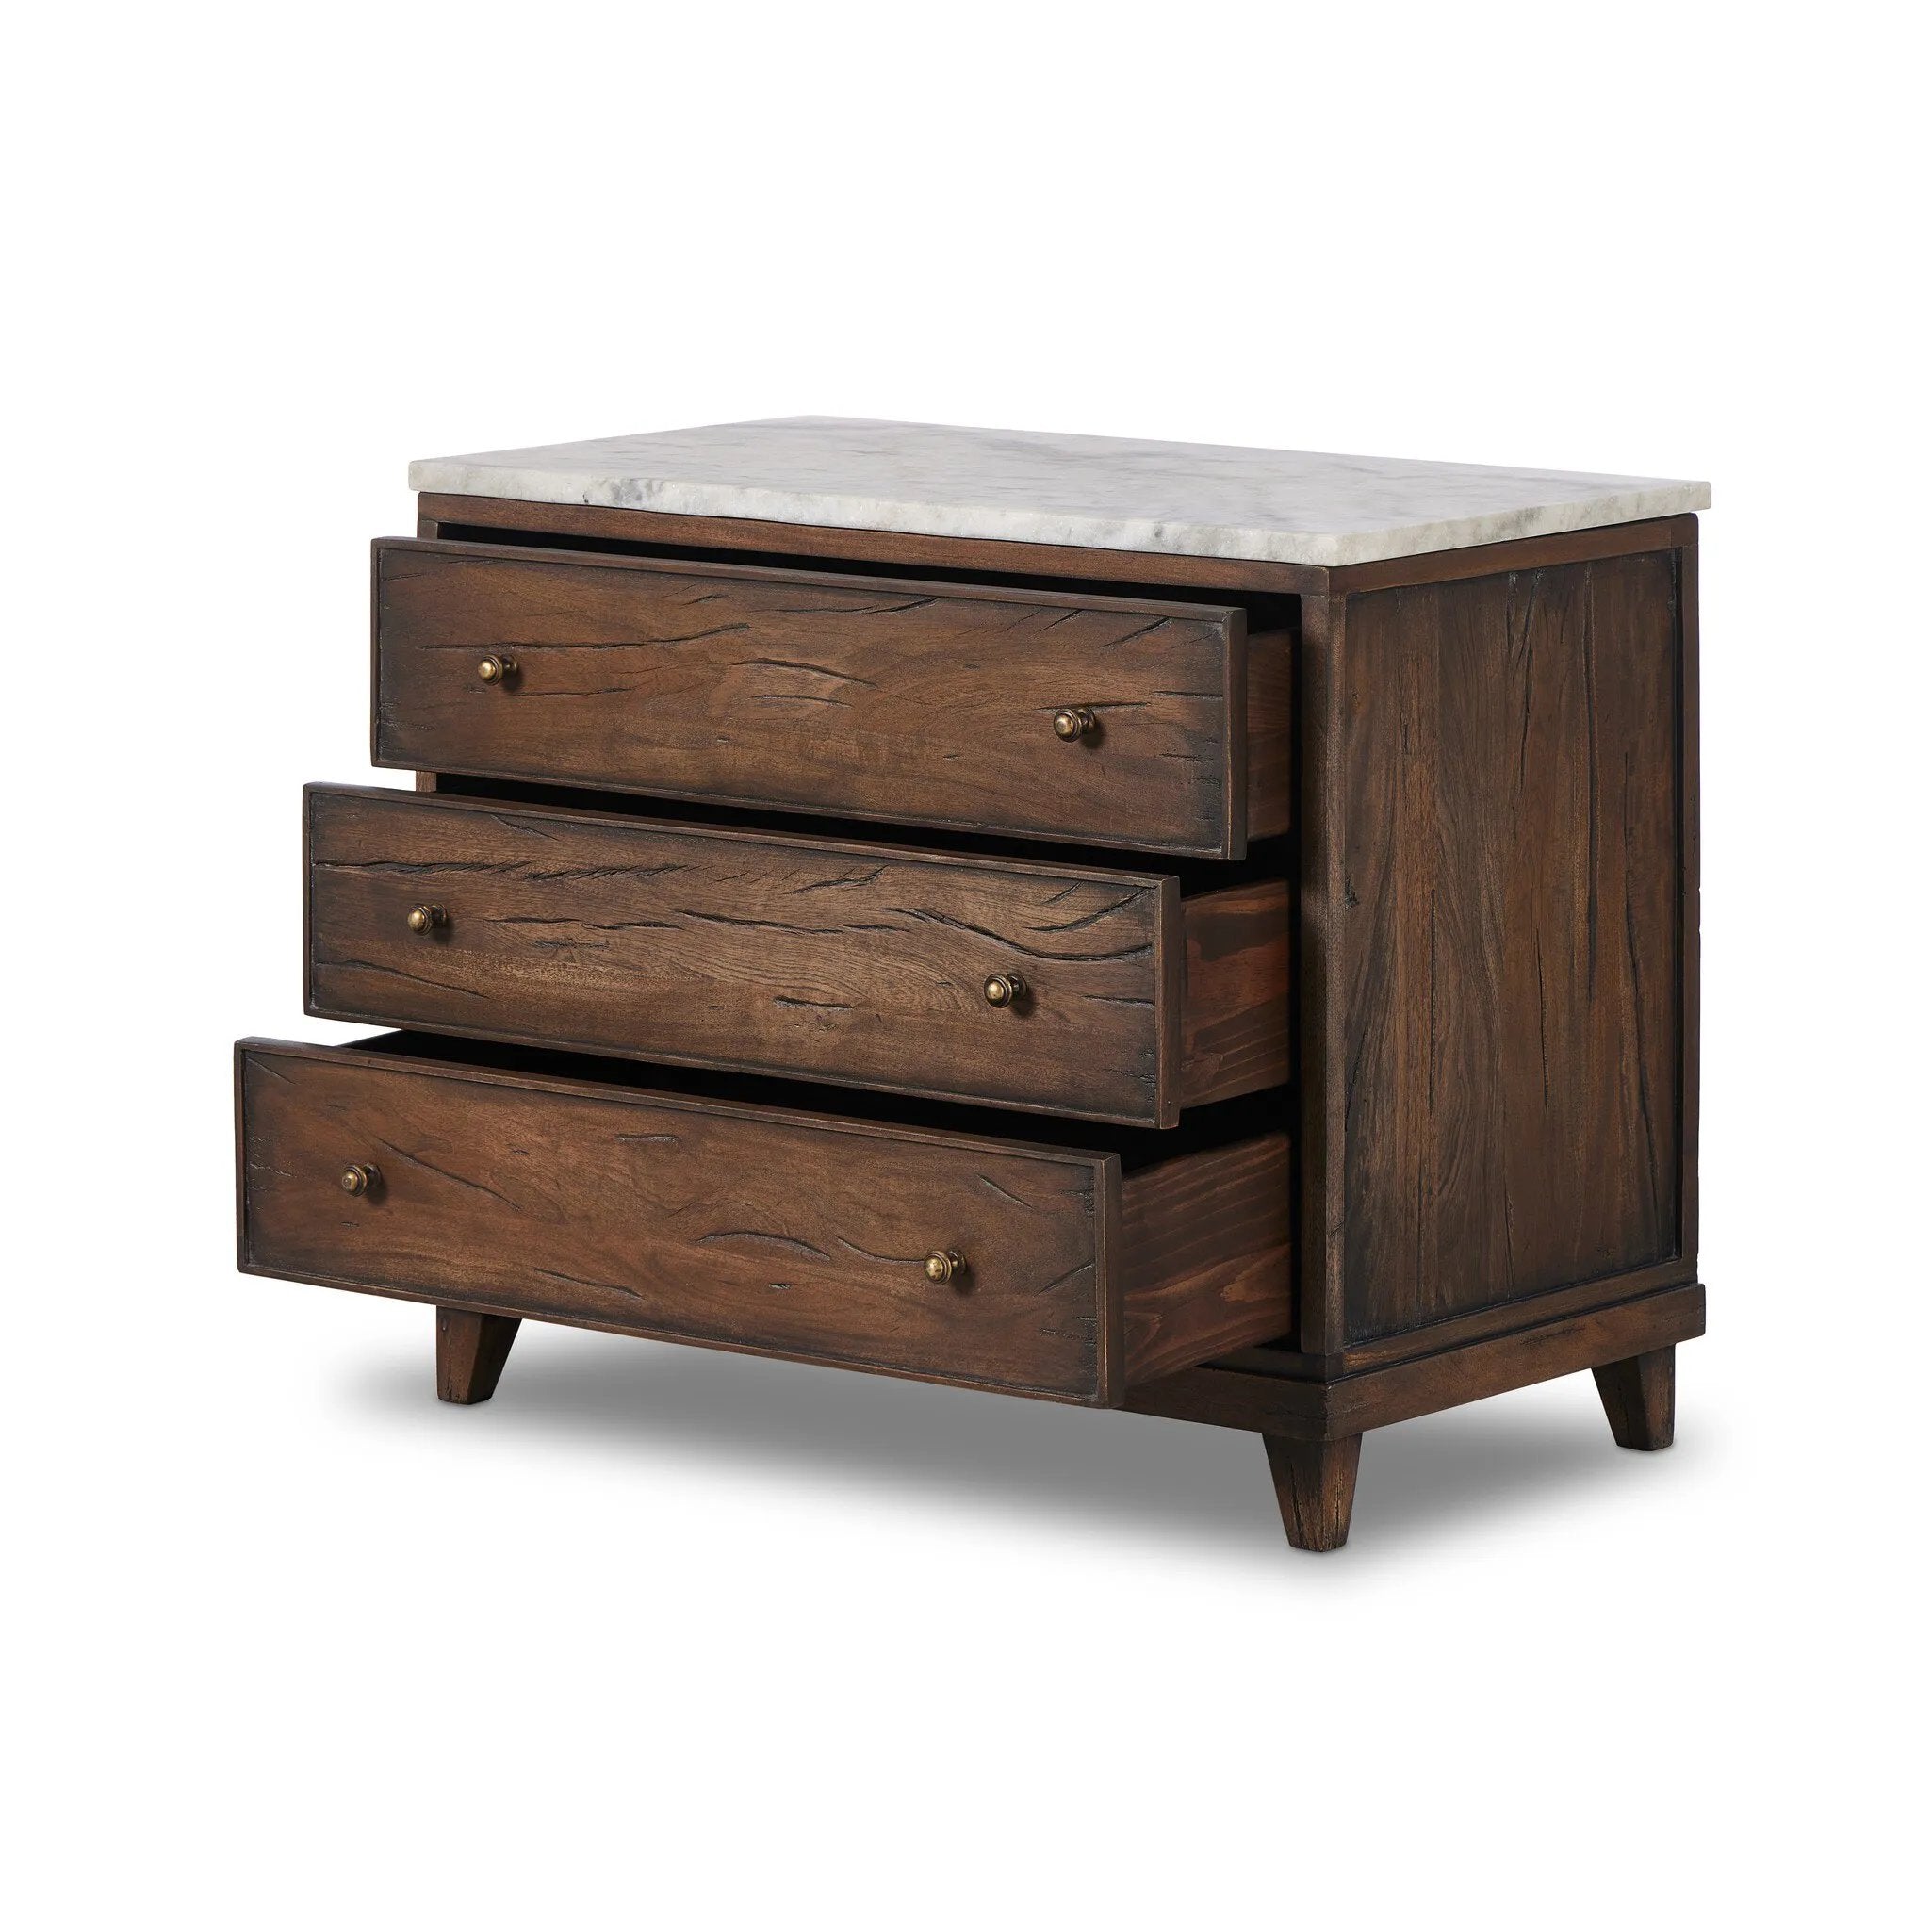 Capturing the charm of vintage French storage, this solid mango wood nightstand stands tall with a polished marble top and softened ogee edges. Three spacious drawers are fitted with classic brass-button hardware. Natural marks and cracks are characteristic of the reclaimed wood.Collection: Harmo Amethyst Home provides interior design, new home construction design consulting, vintage area rugs, and lighting in the Miami metro area.